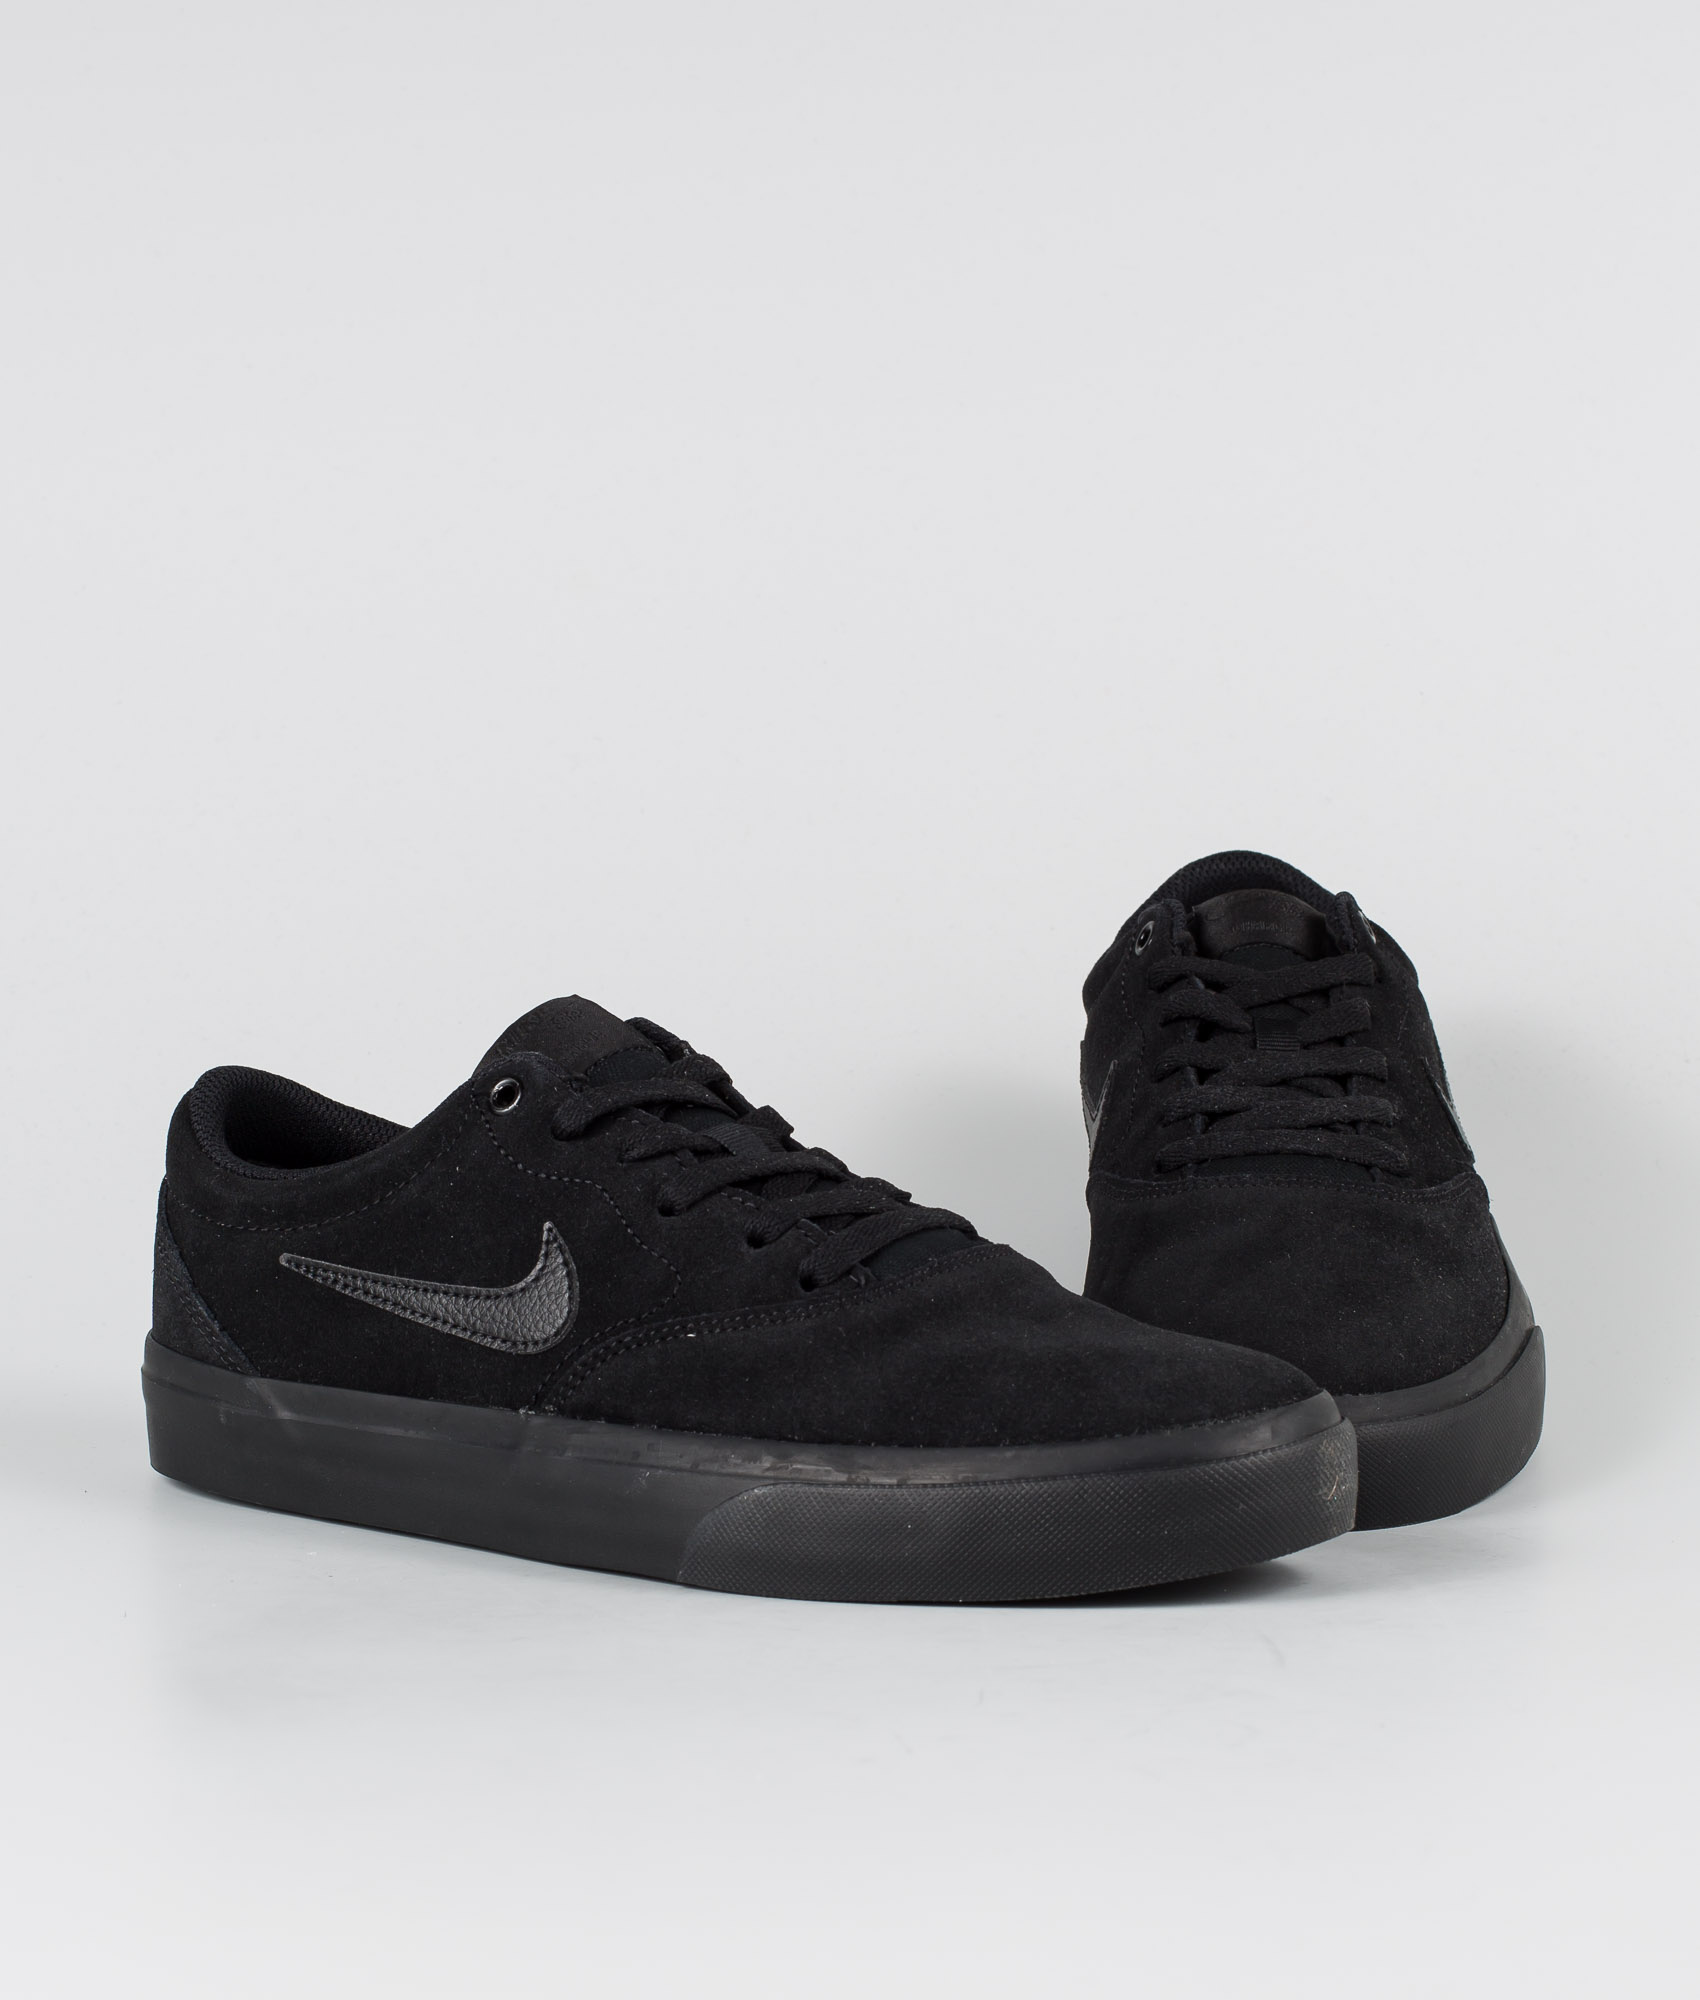 nike black suede shoes